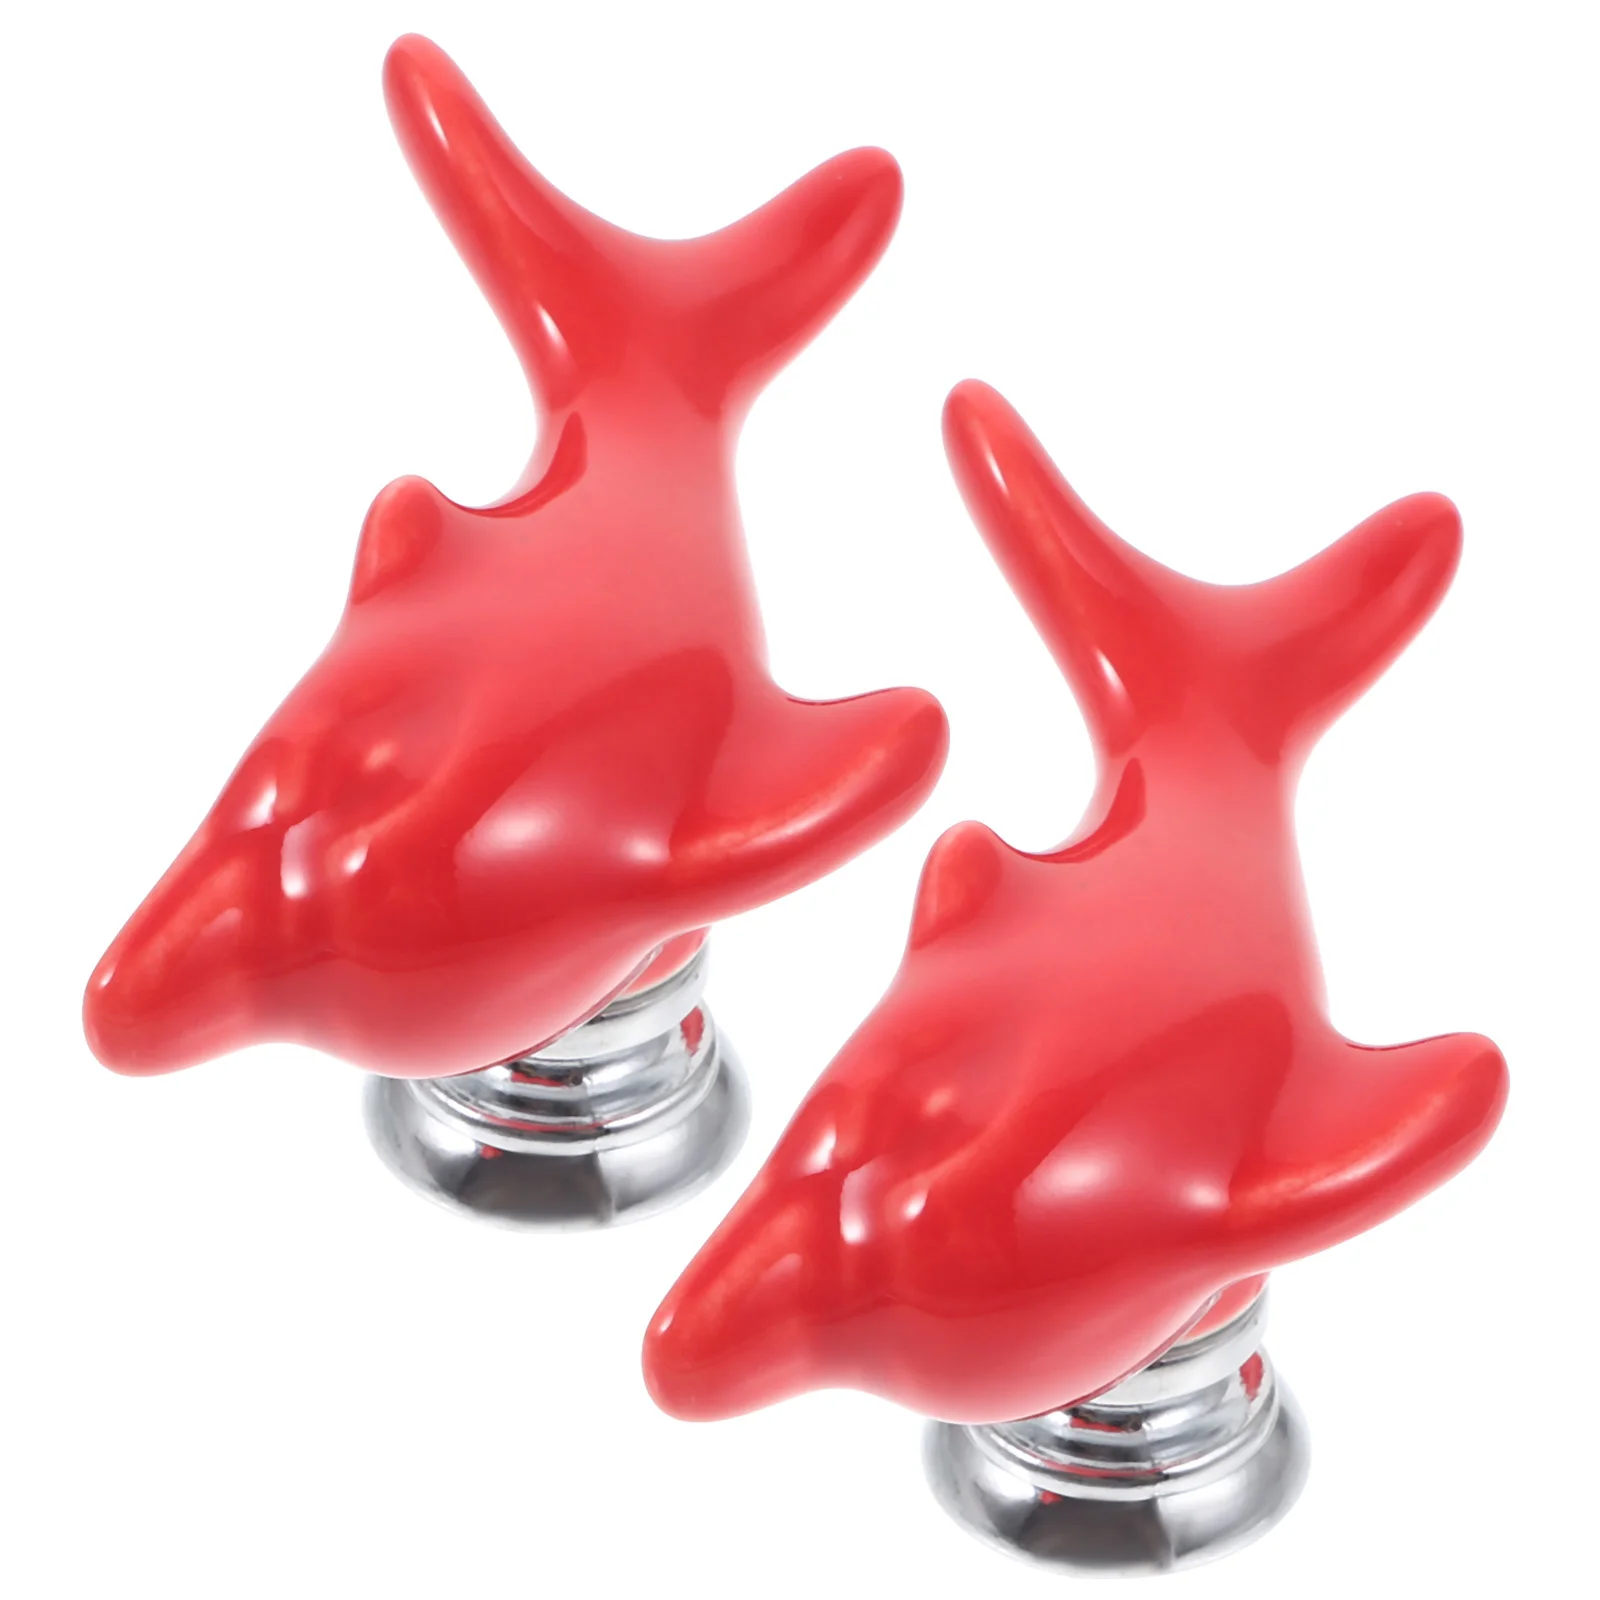 

2 Pcs Toilet Button Assistant Tool Tank Flush Replacement Fashion Dolphin Shaped Helper for Ceramics Top Handle